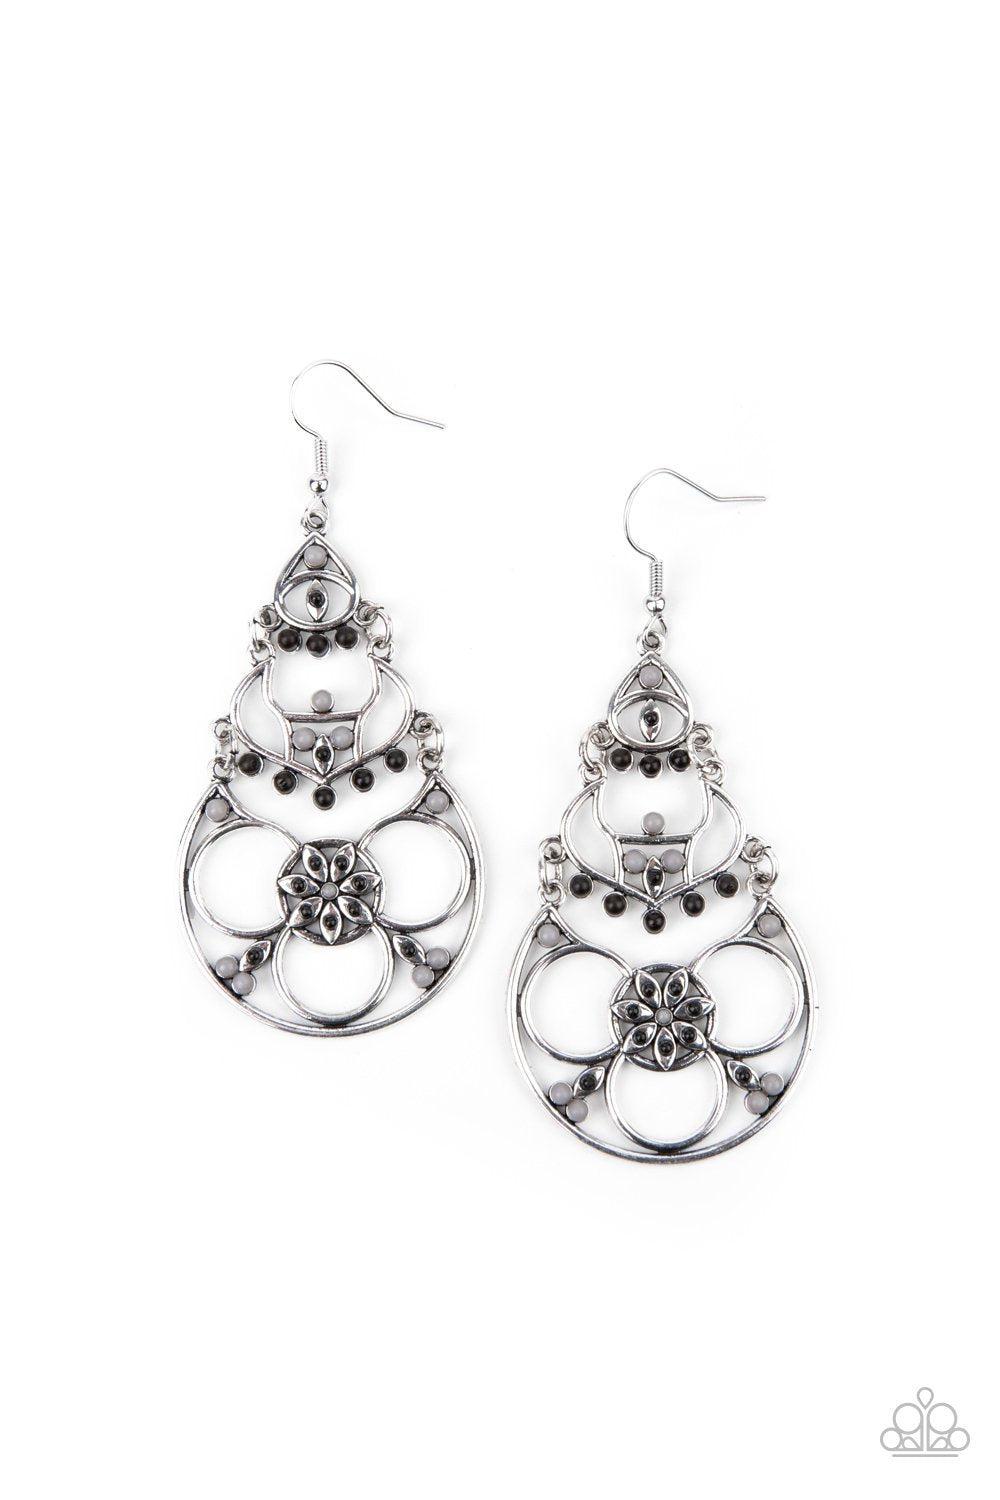 Garden Melody Black and Silver Earrings - Paparazzi Accessories - lightbox -CarasShop.com - $5 Jewelry by Cara Jewels